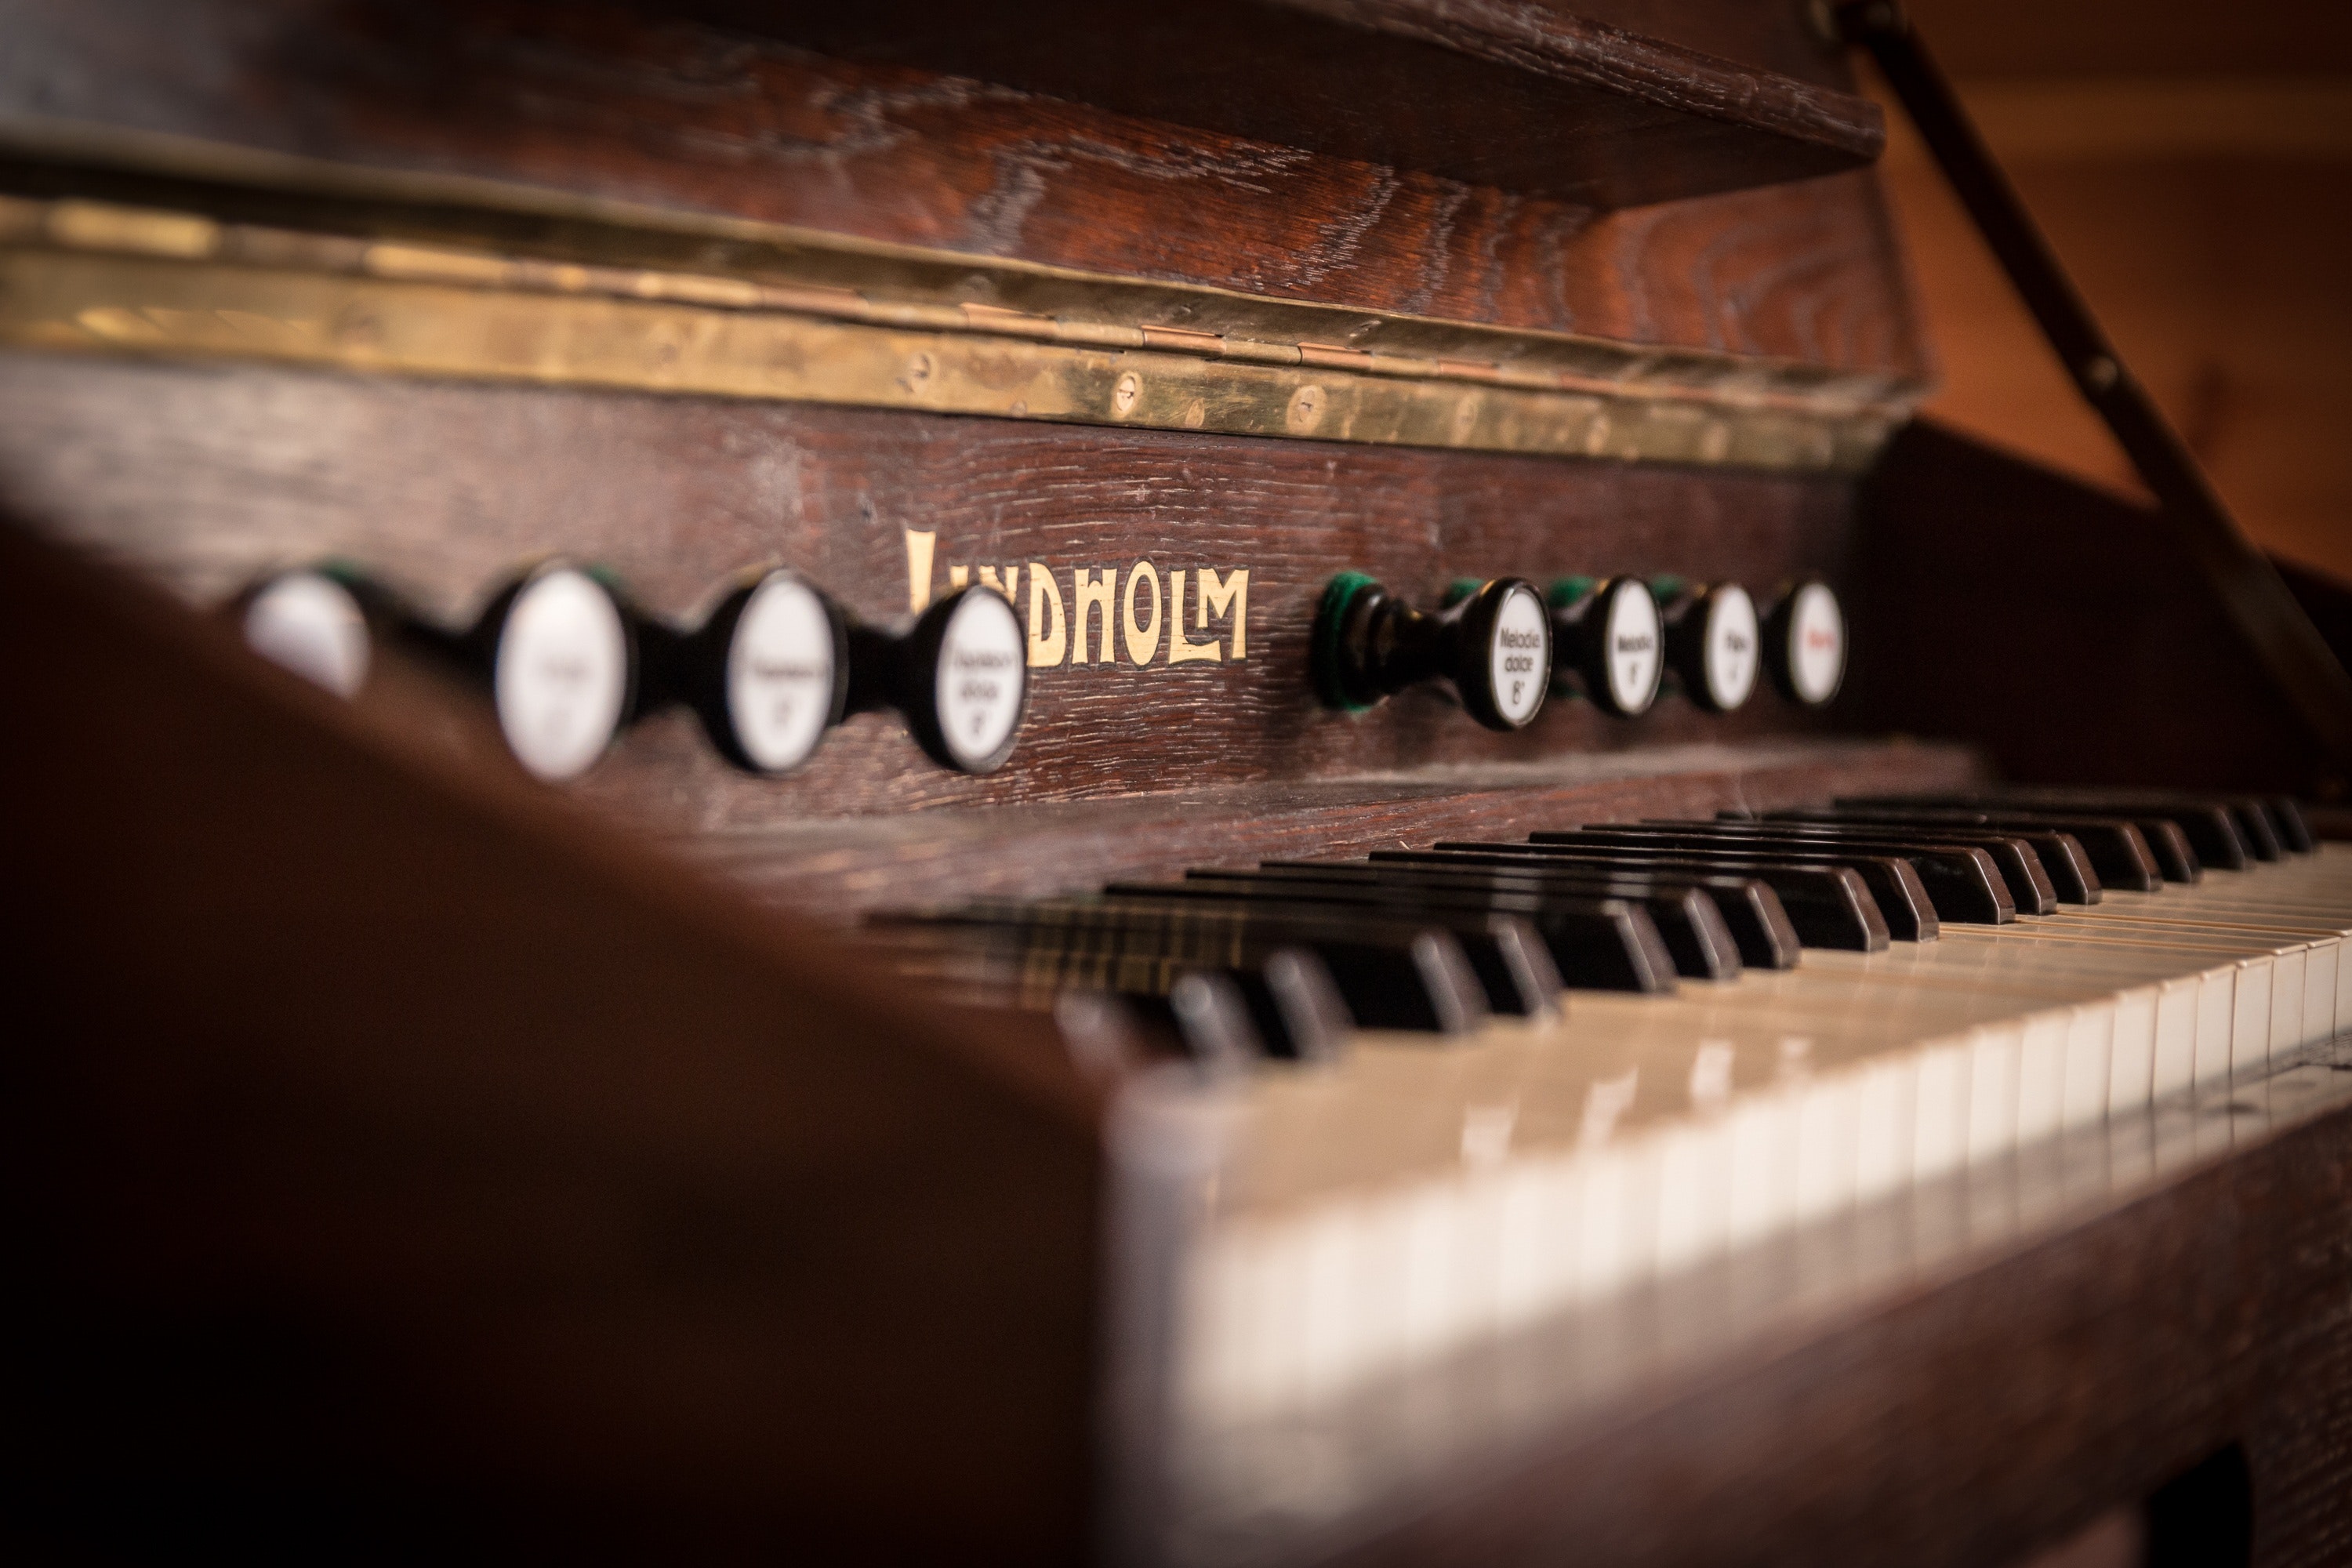 Brown wooden piano photo